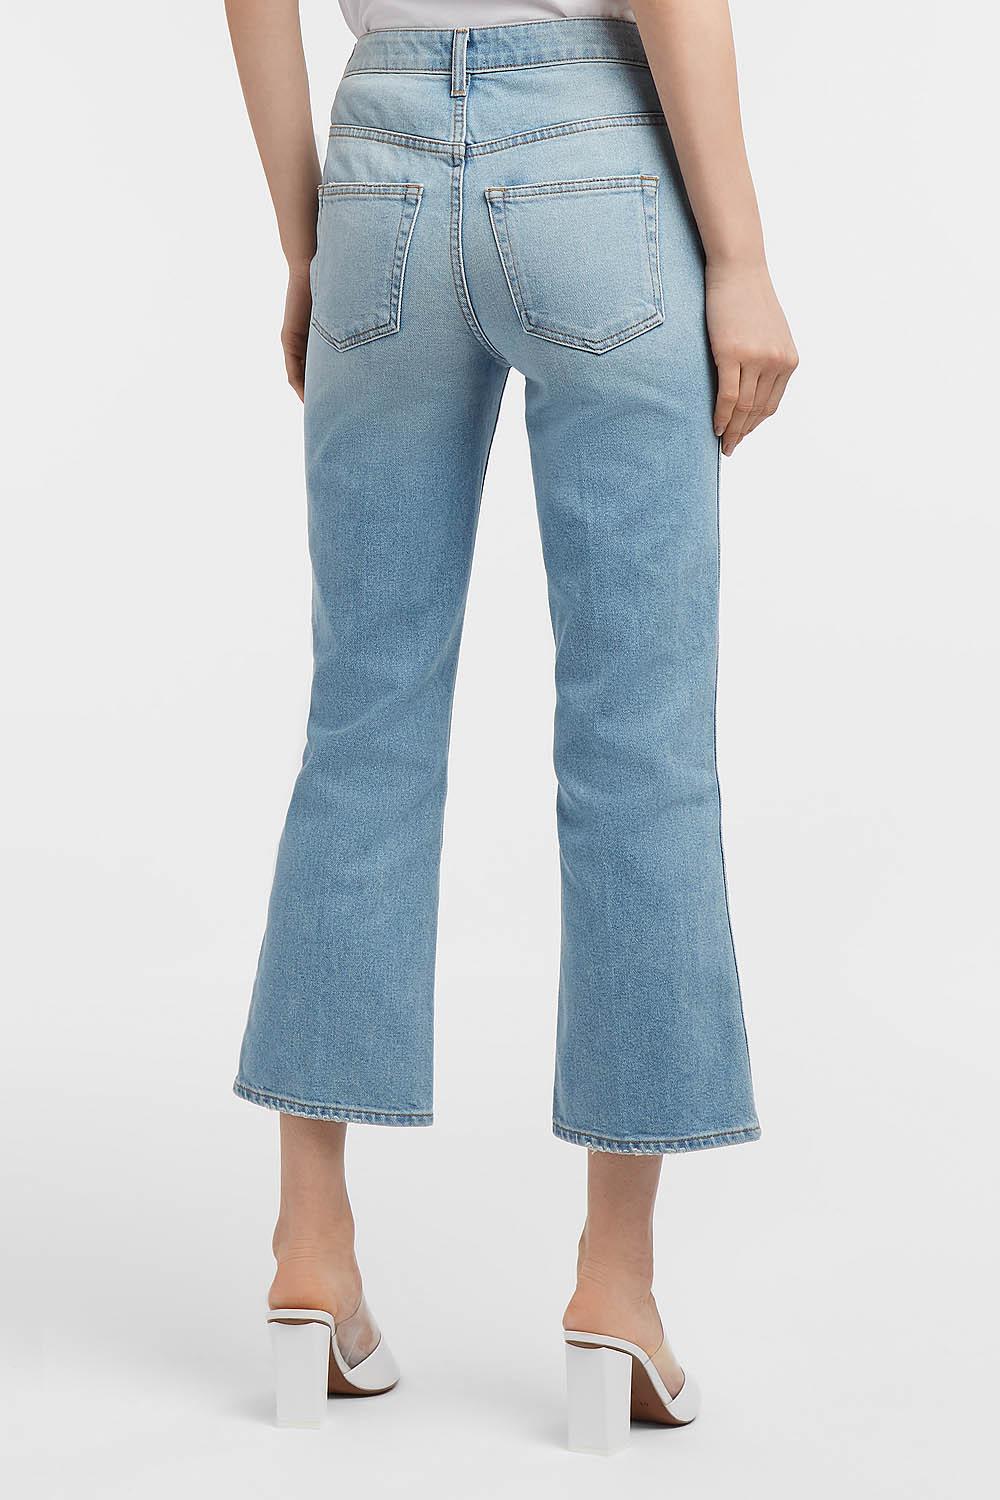 Khaite Denim Benny Cropped Flared Jeans in Blue - Lyst